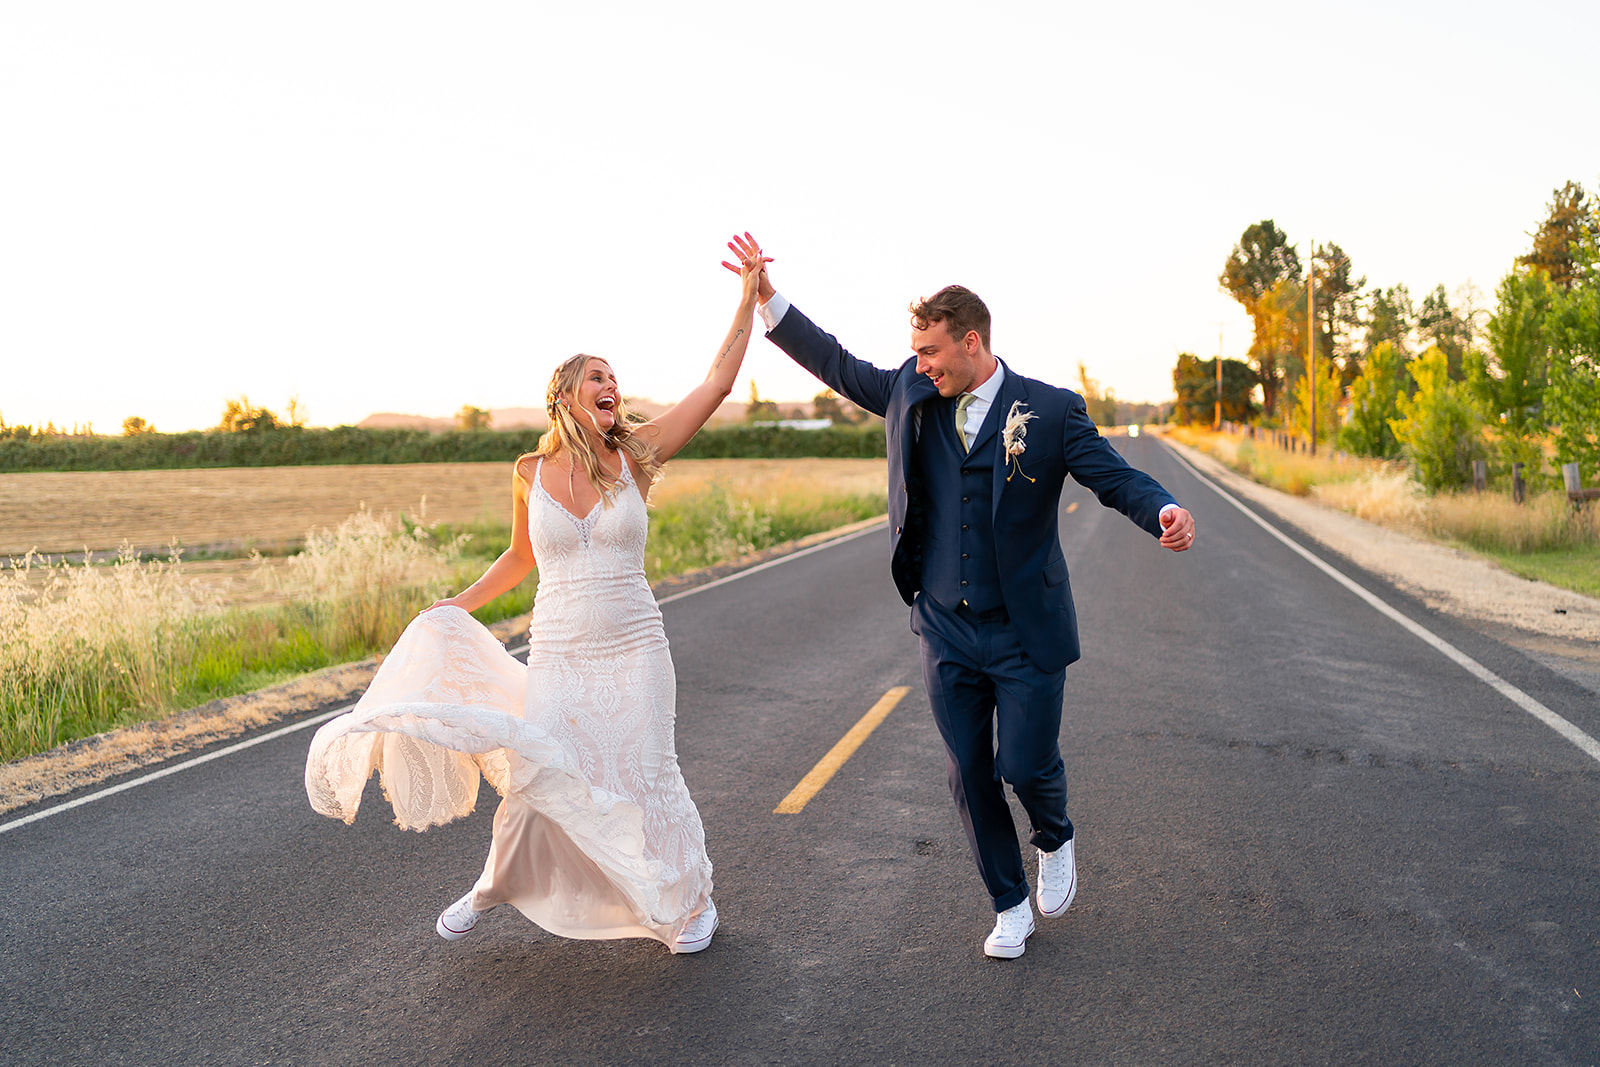 Newlywed couple dancing in the street at sunset